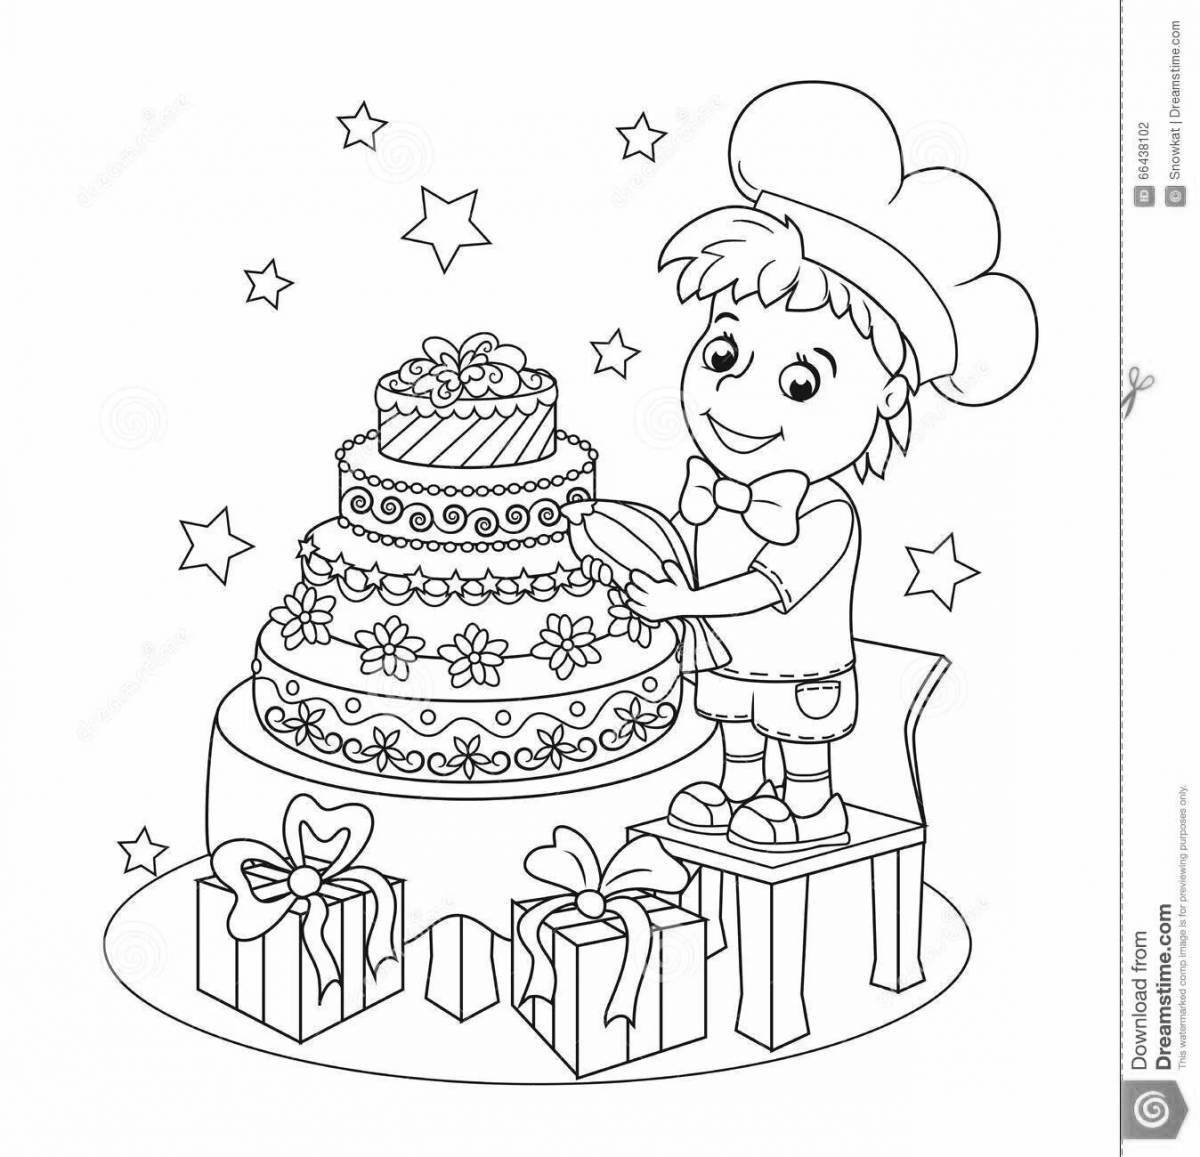 Color-wild pastry chef coloring page